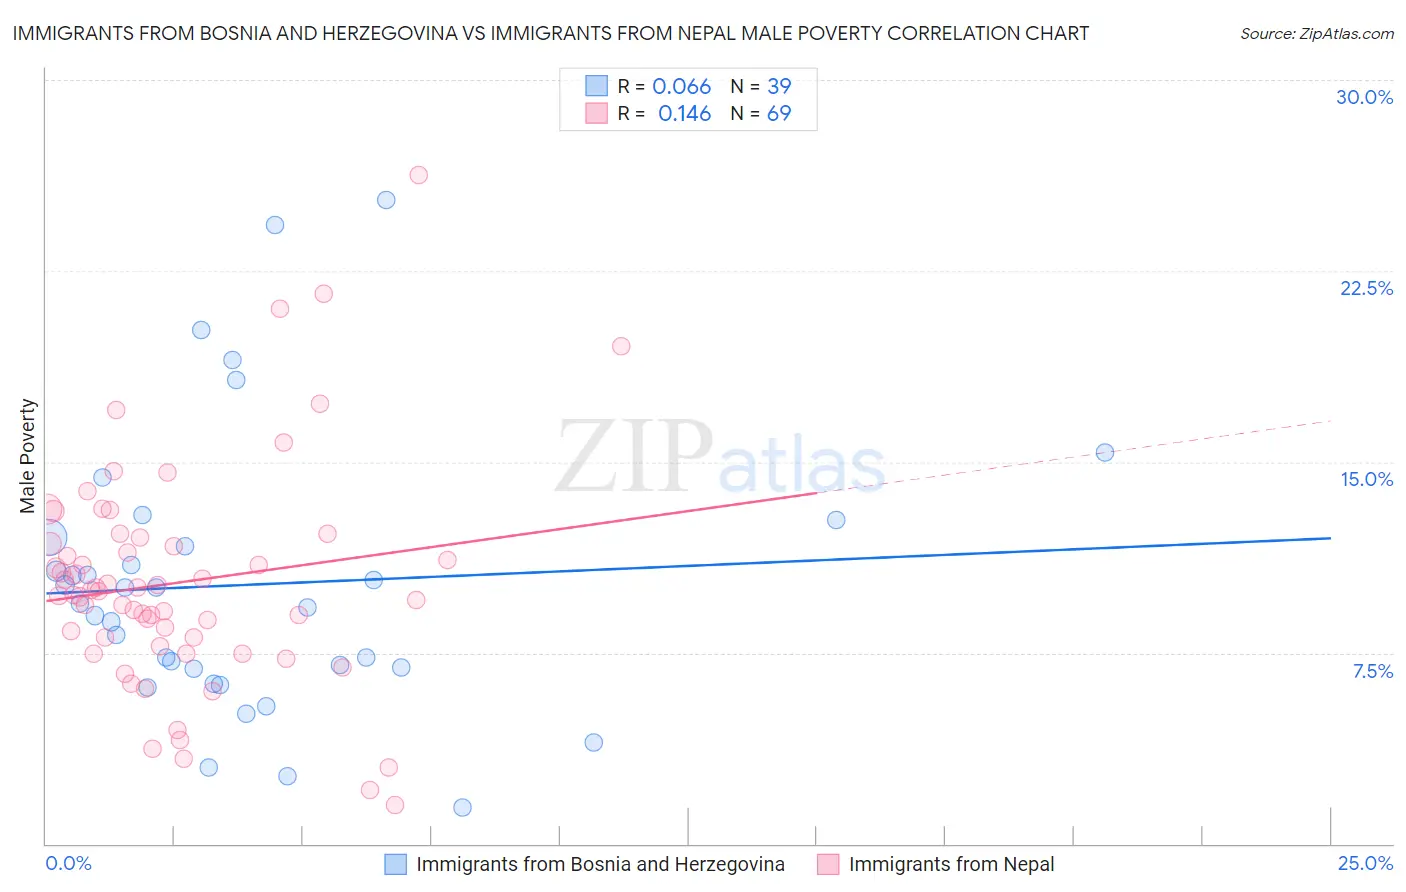 Immigrants from Bosnia and Herzegovina vs Immigrants from Nepal Male Poverty